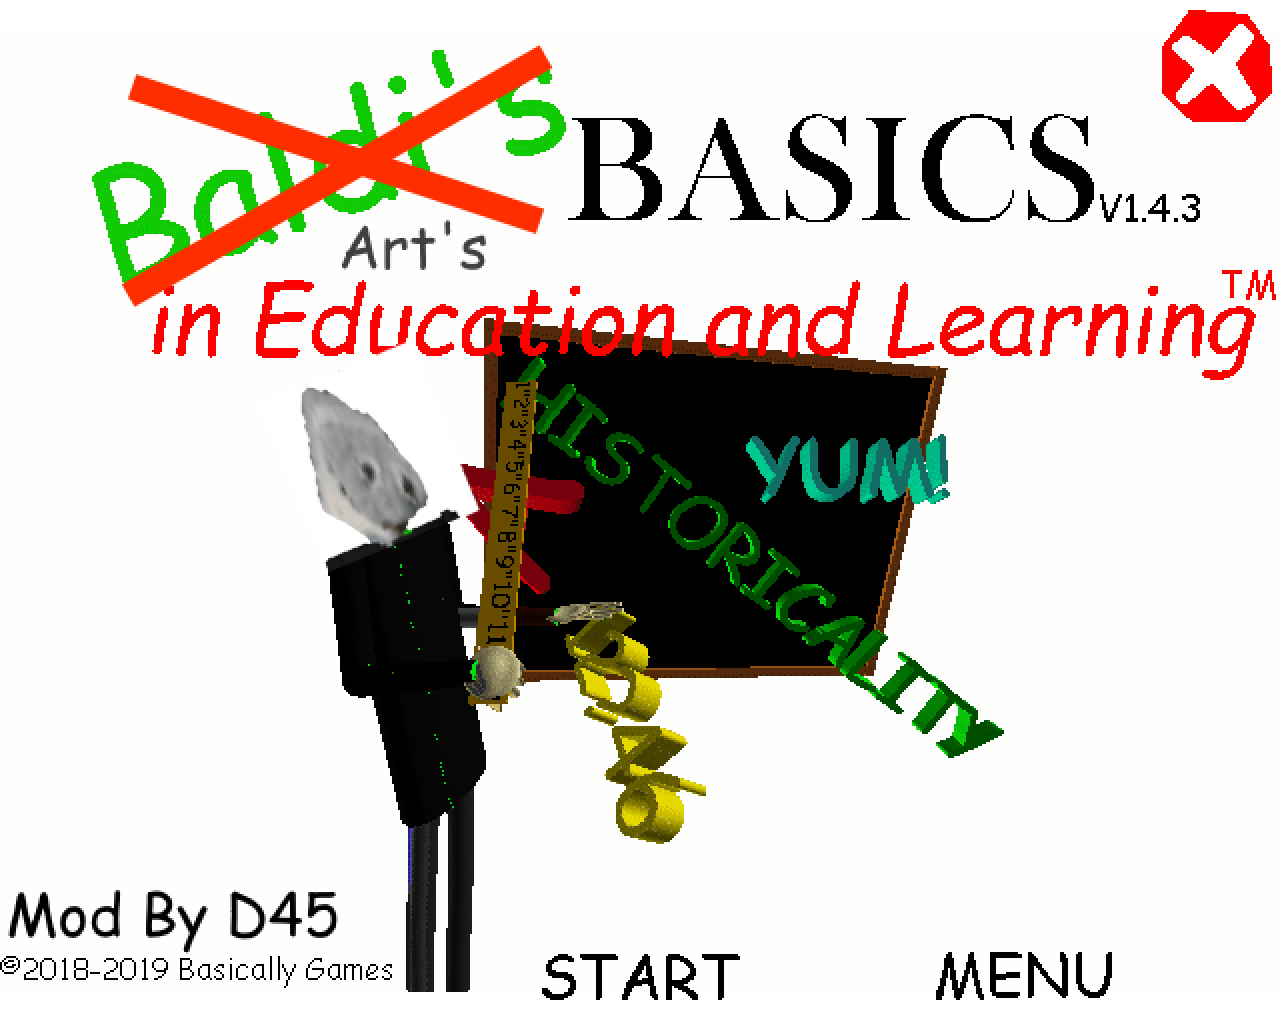 The Spriters Resource - Full Sheet View - Baldi's Basics Plus - Arts and  Crafters